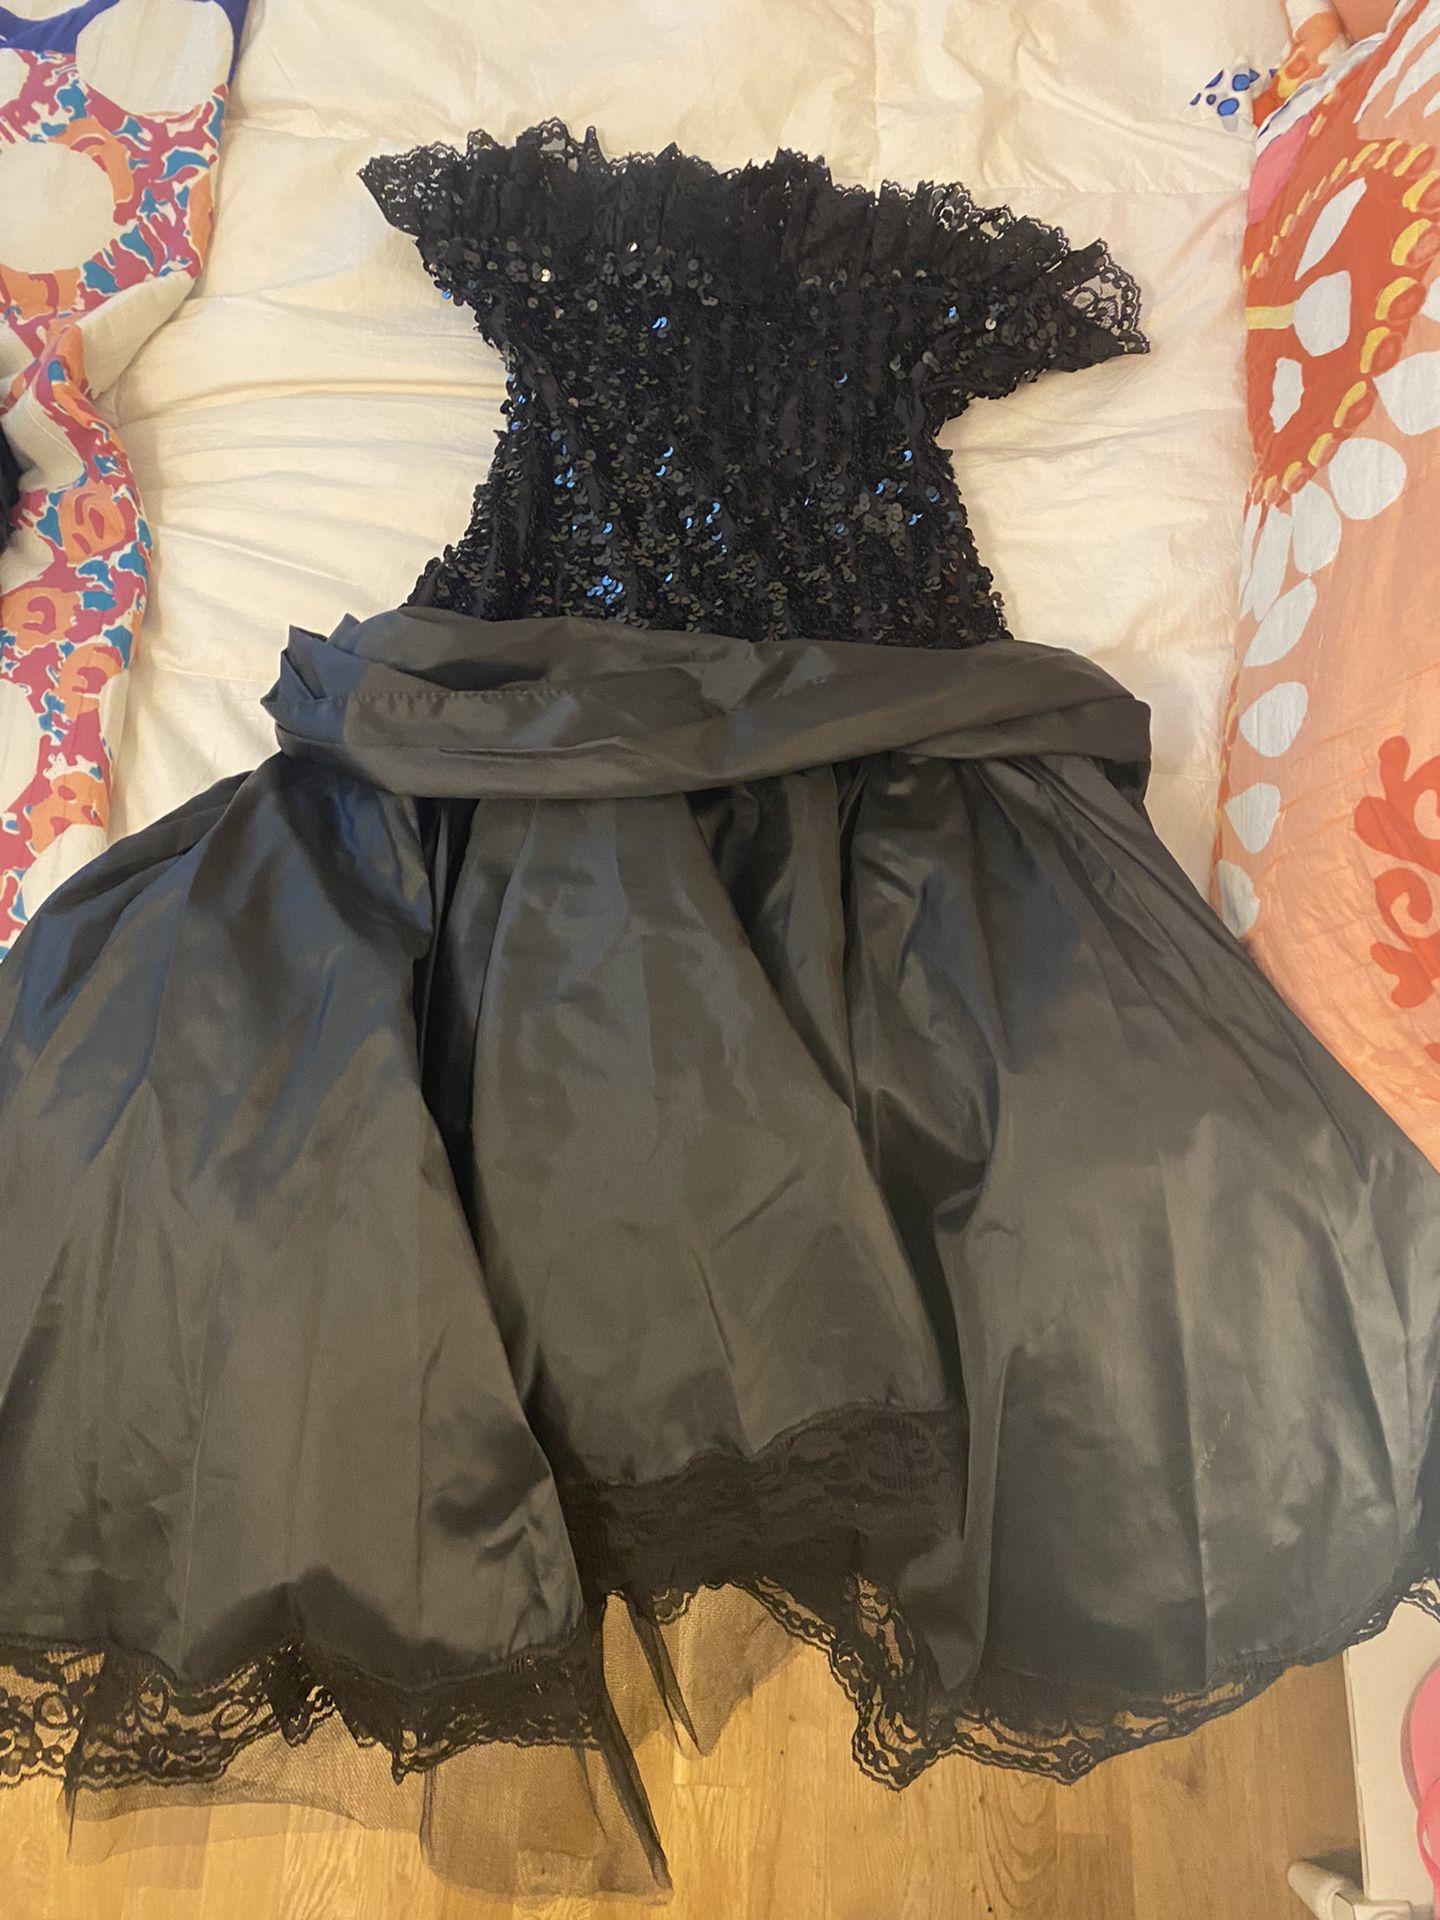 80’s Prom Dress $20 Bought For $100